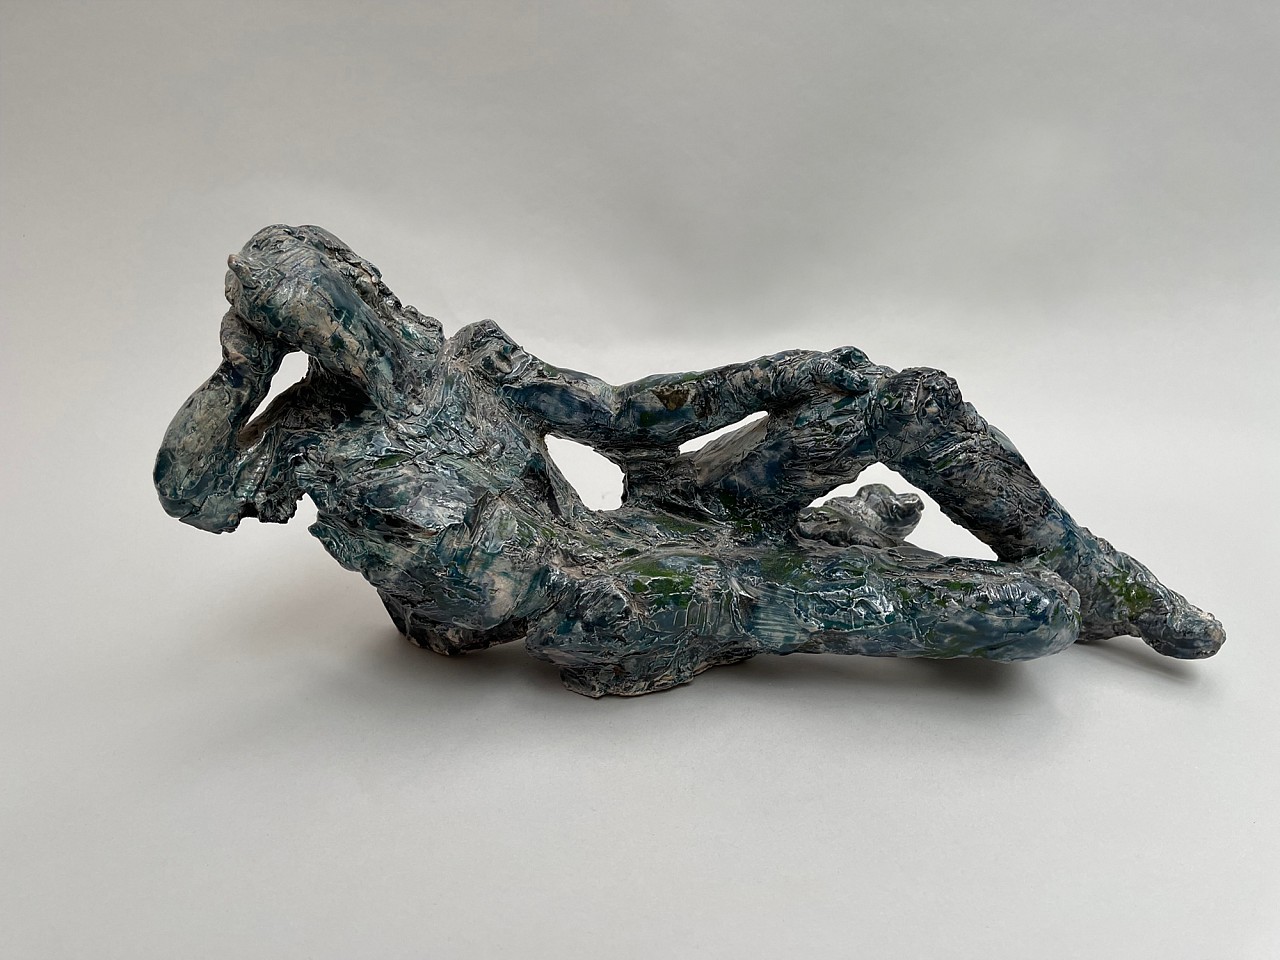 Isabelle Melchior, Reclining Man, 2022
Ceramics dotted with blue enamel, 17"x 7"x 8"
IM 1321
Price Upon Request